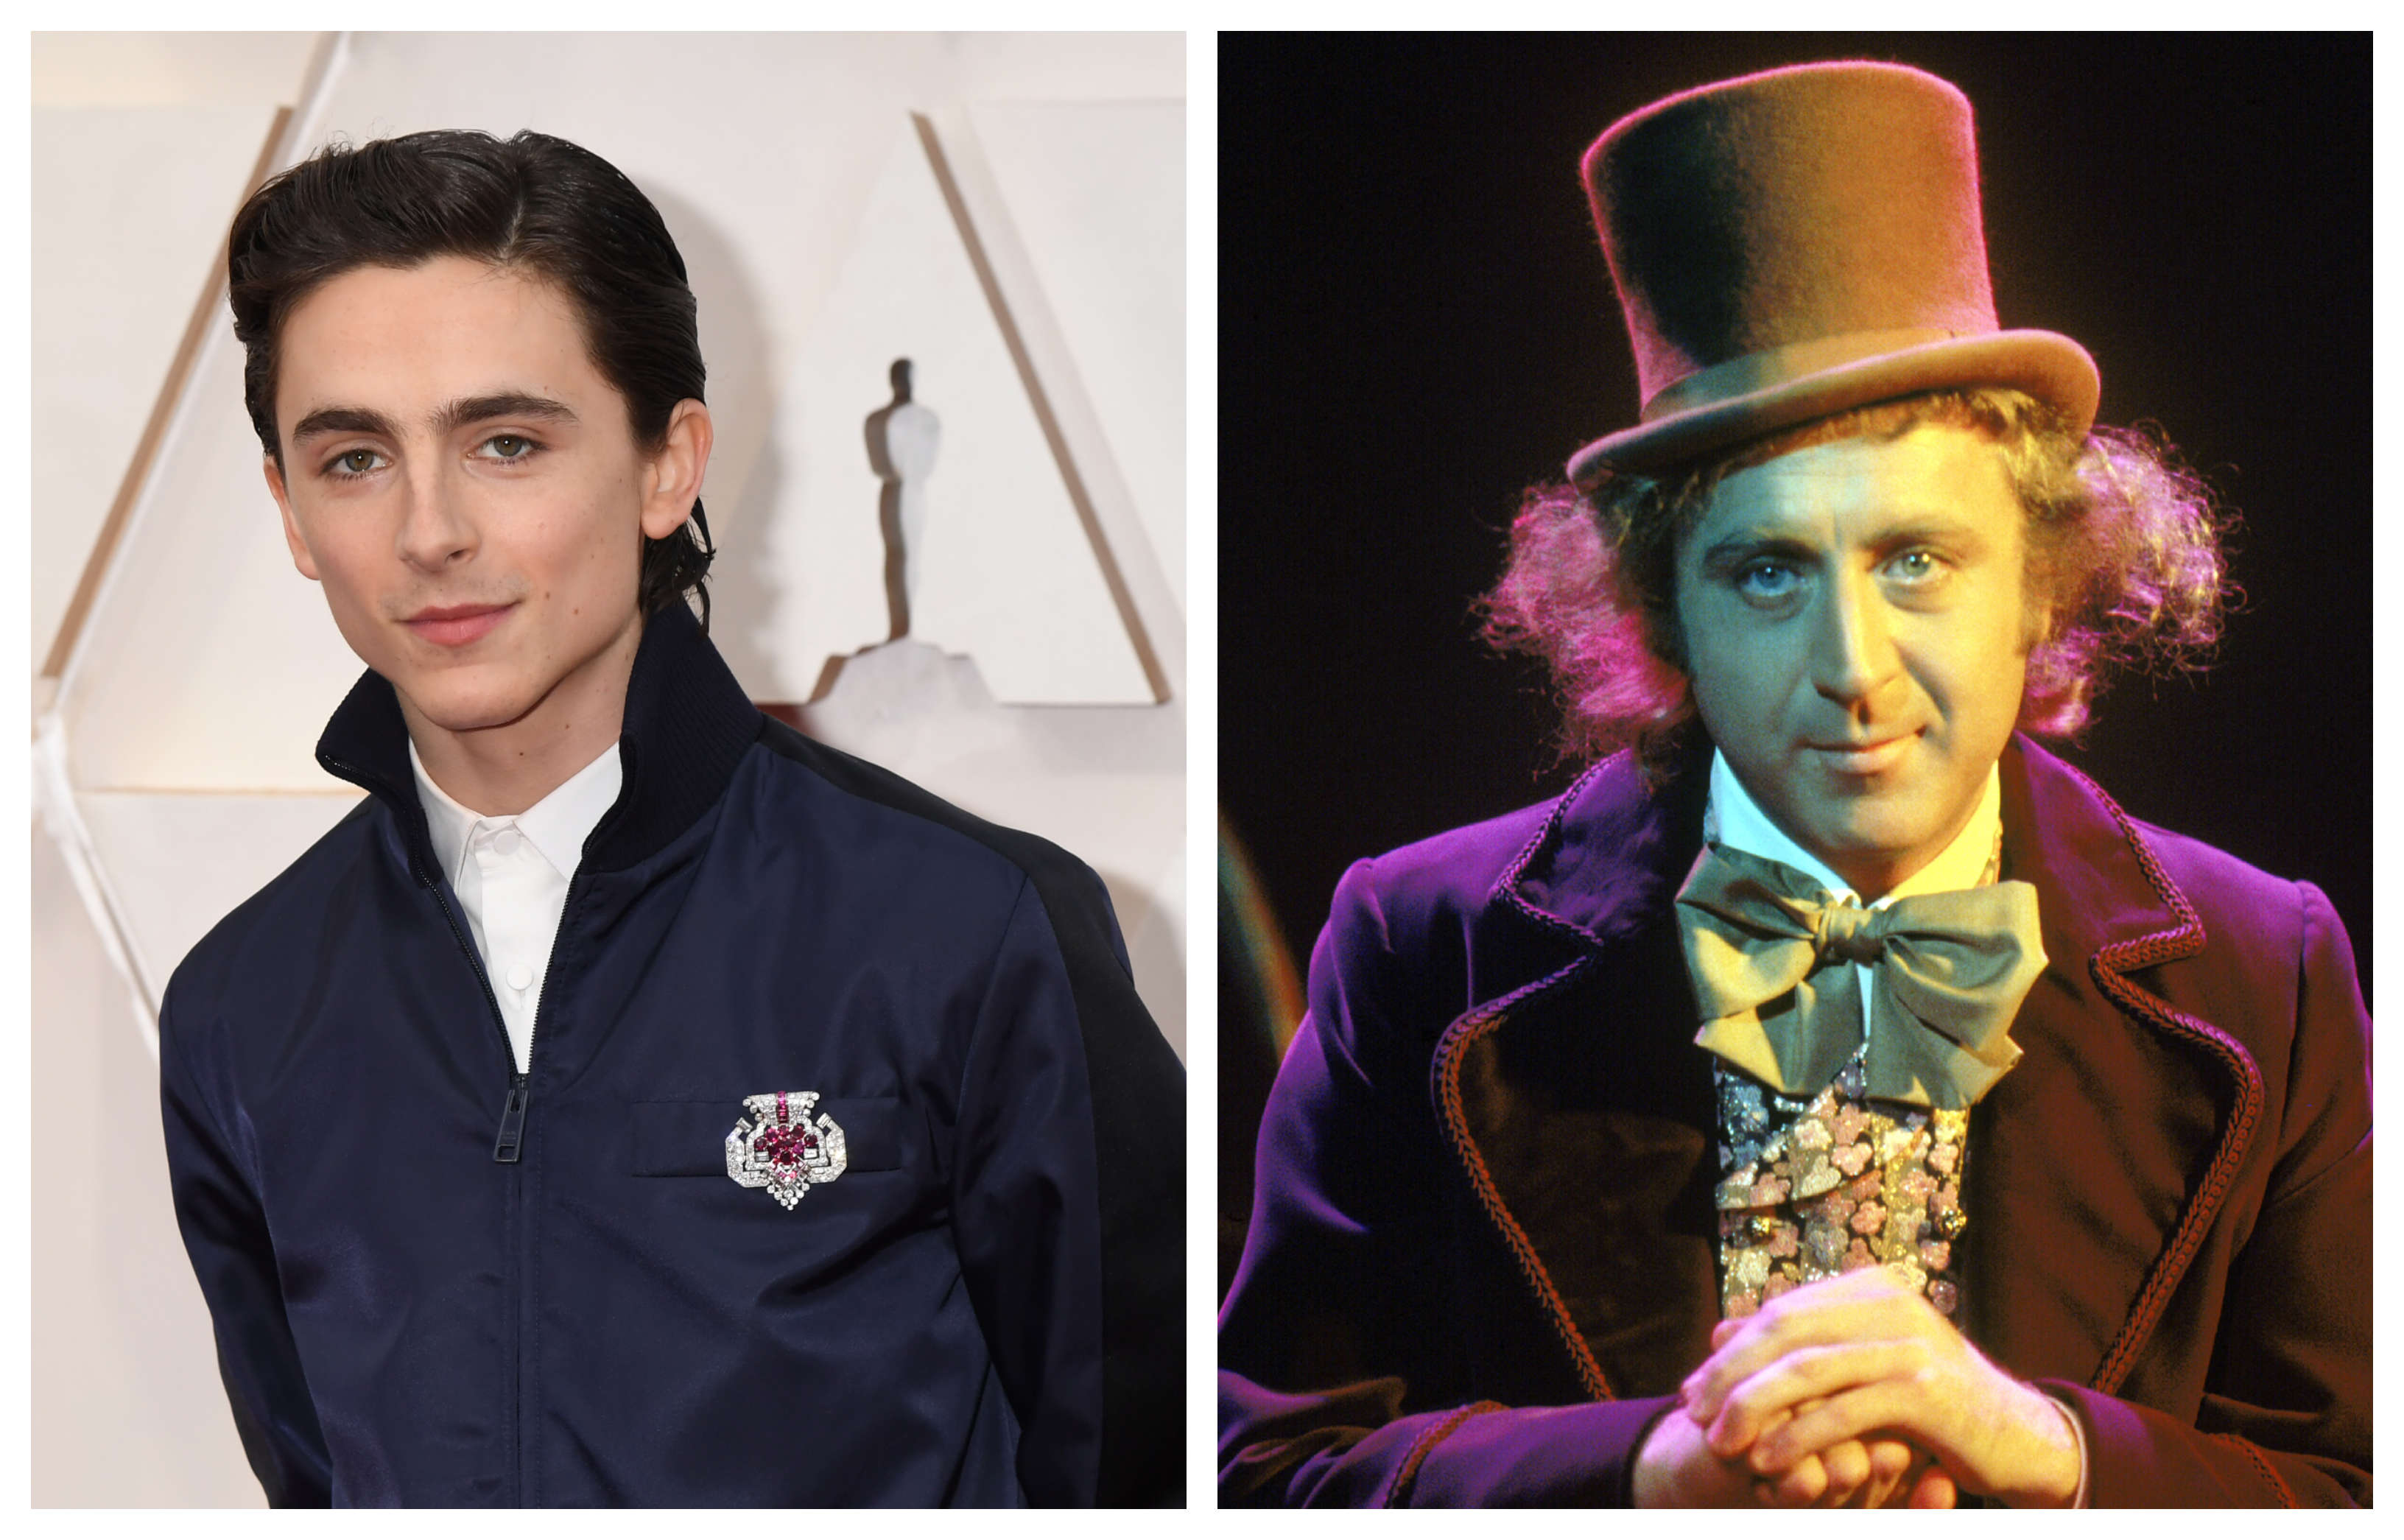 Timothee Chalamet cast as young Willy Wonka in Roald Dahl prequel film